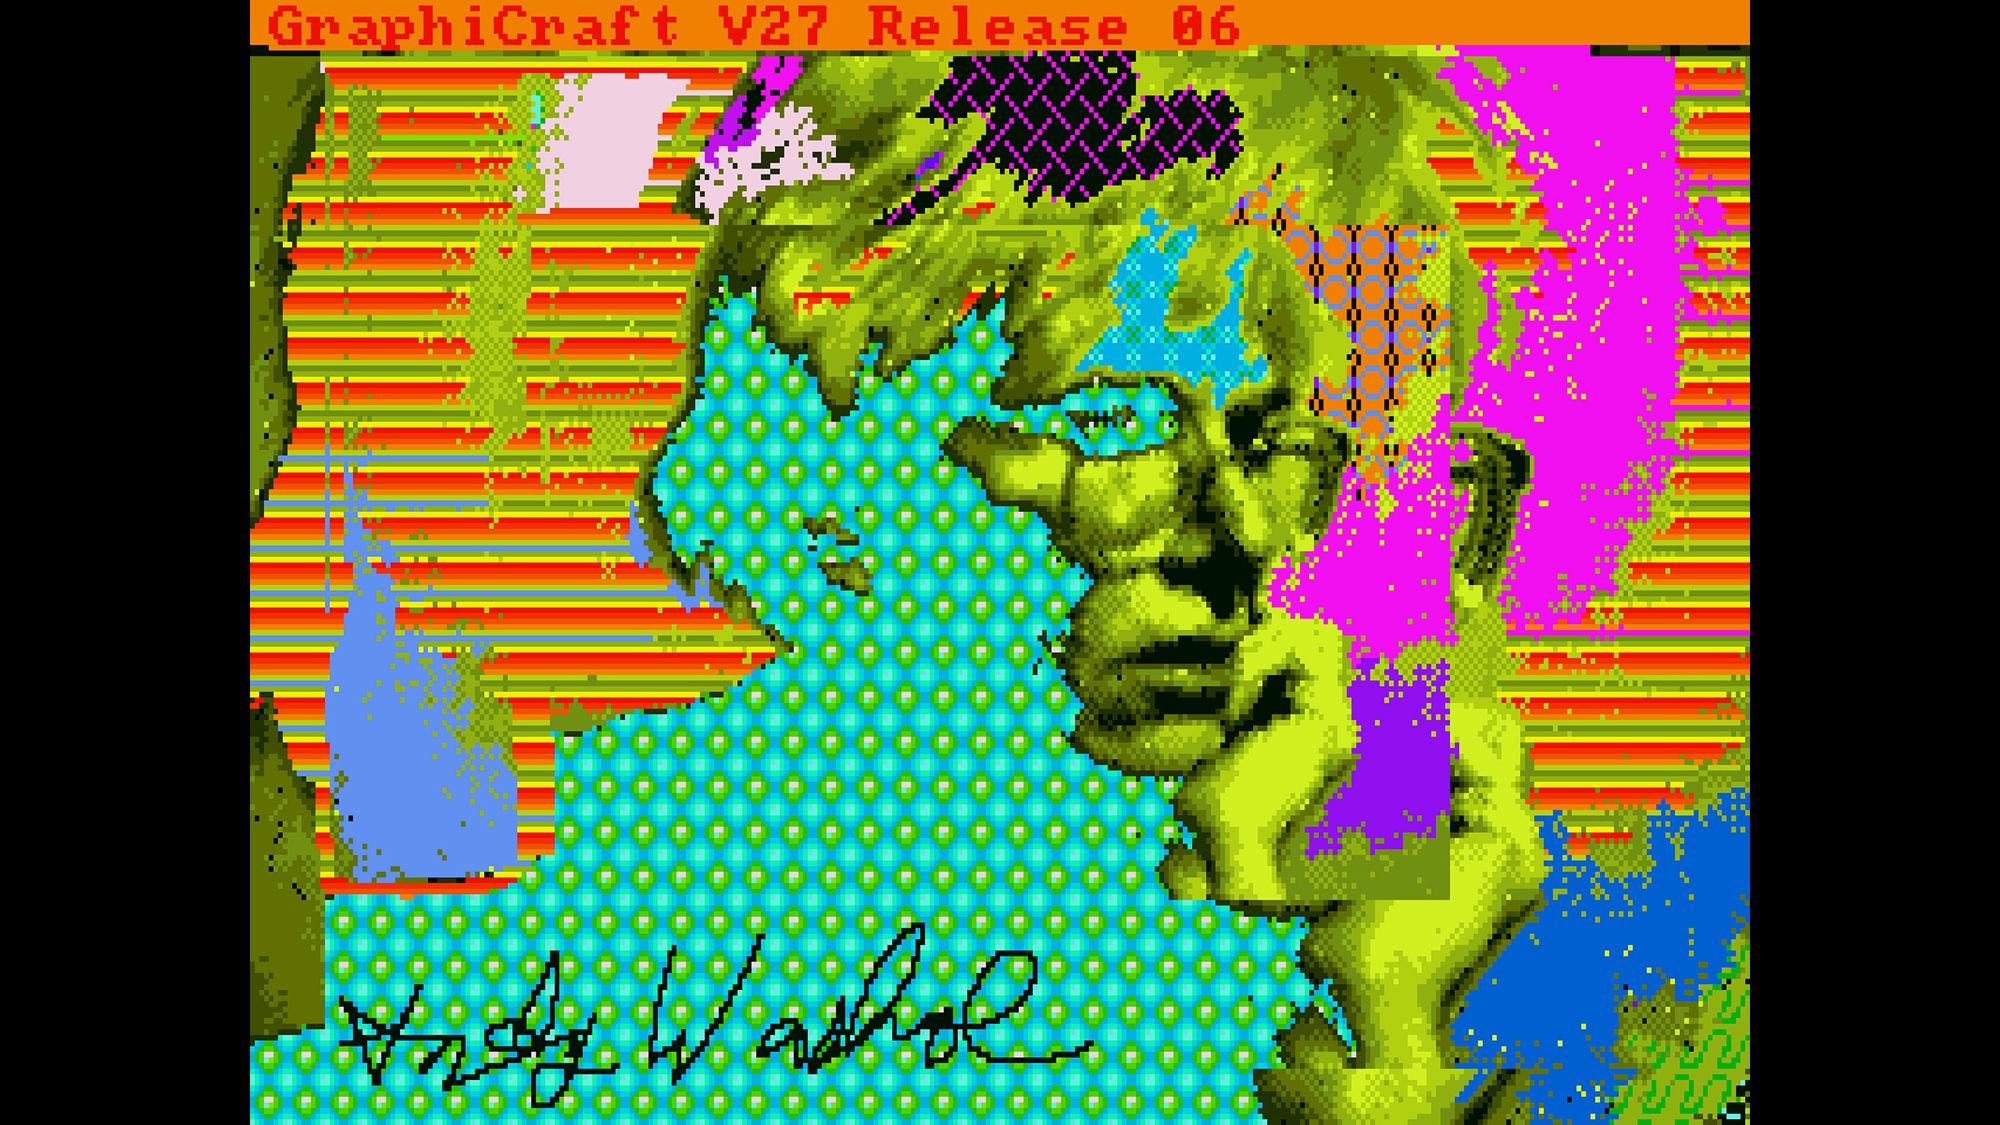 Warhol's lost computer art found later |